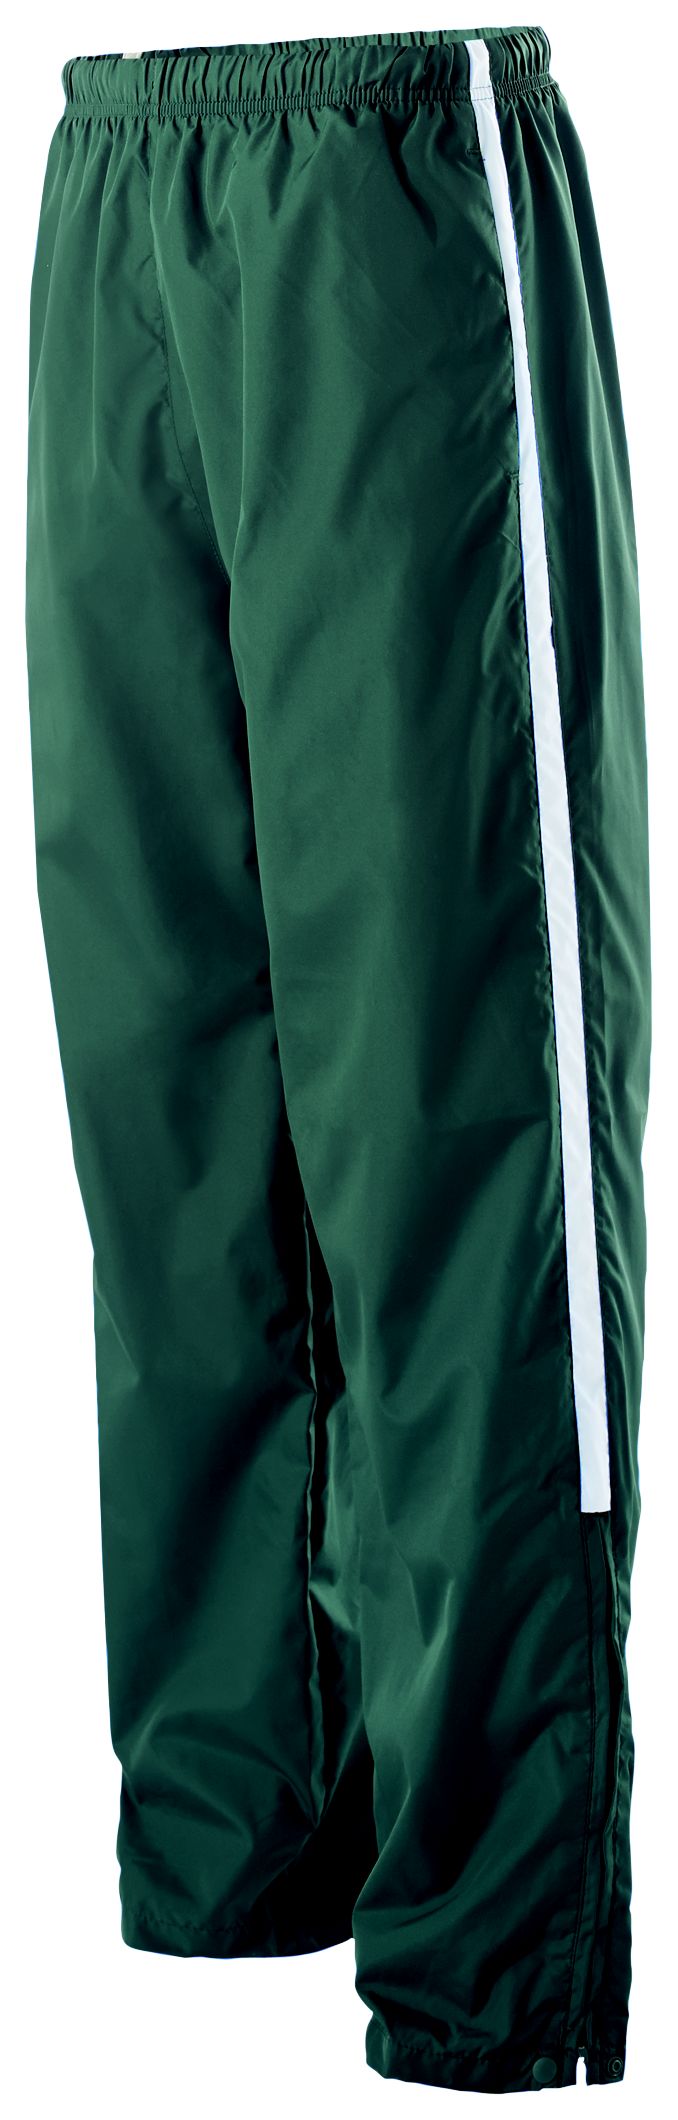 Holloway Sable Pant in Dark Green/White  -Part of the Adult, Adult-Pants, Pants, Holloway product lines at KanaleyCreations.com